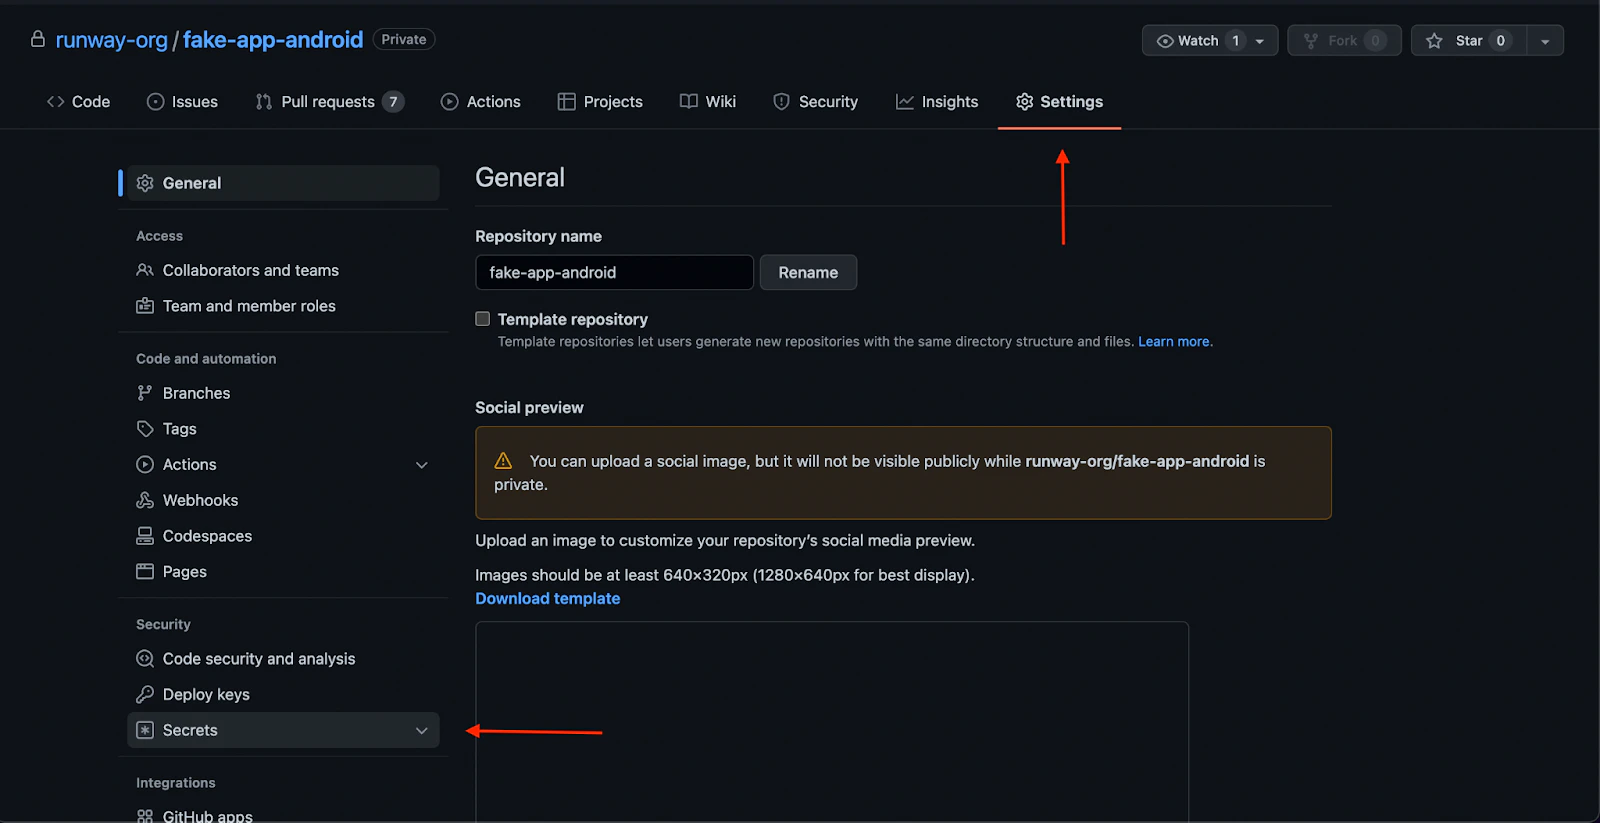 Secrets in GitHub repo, from Settings